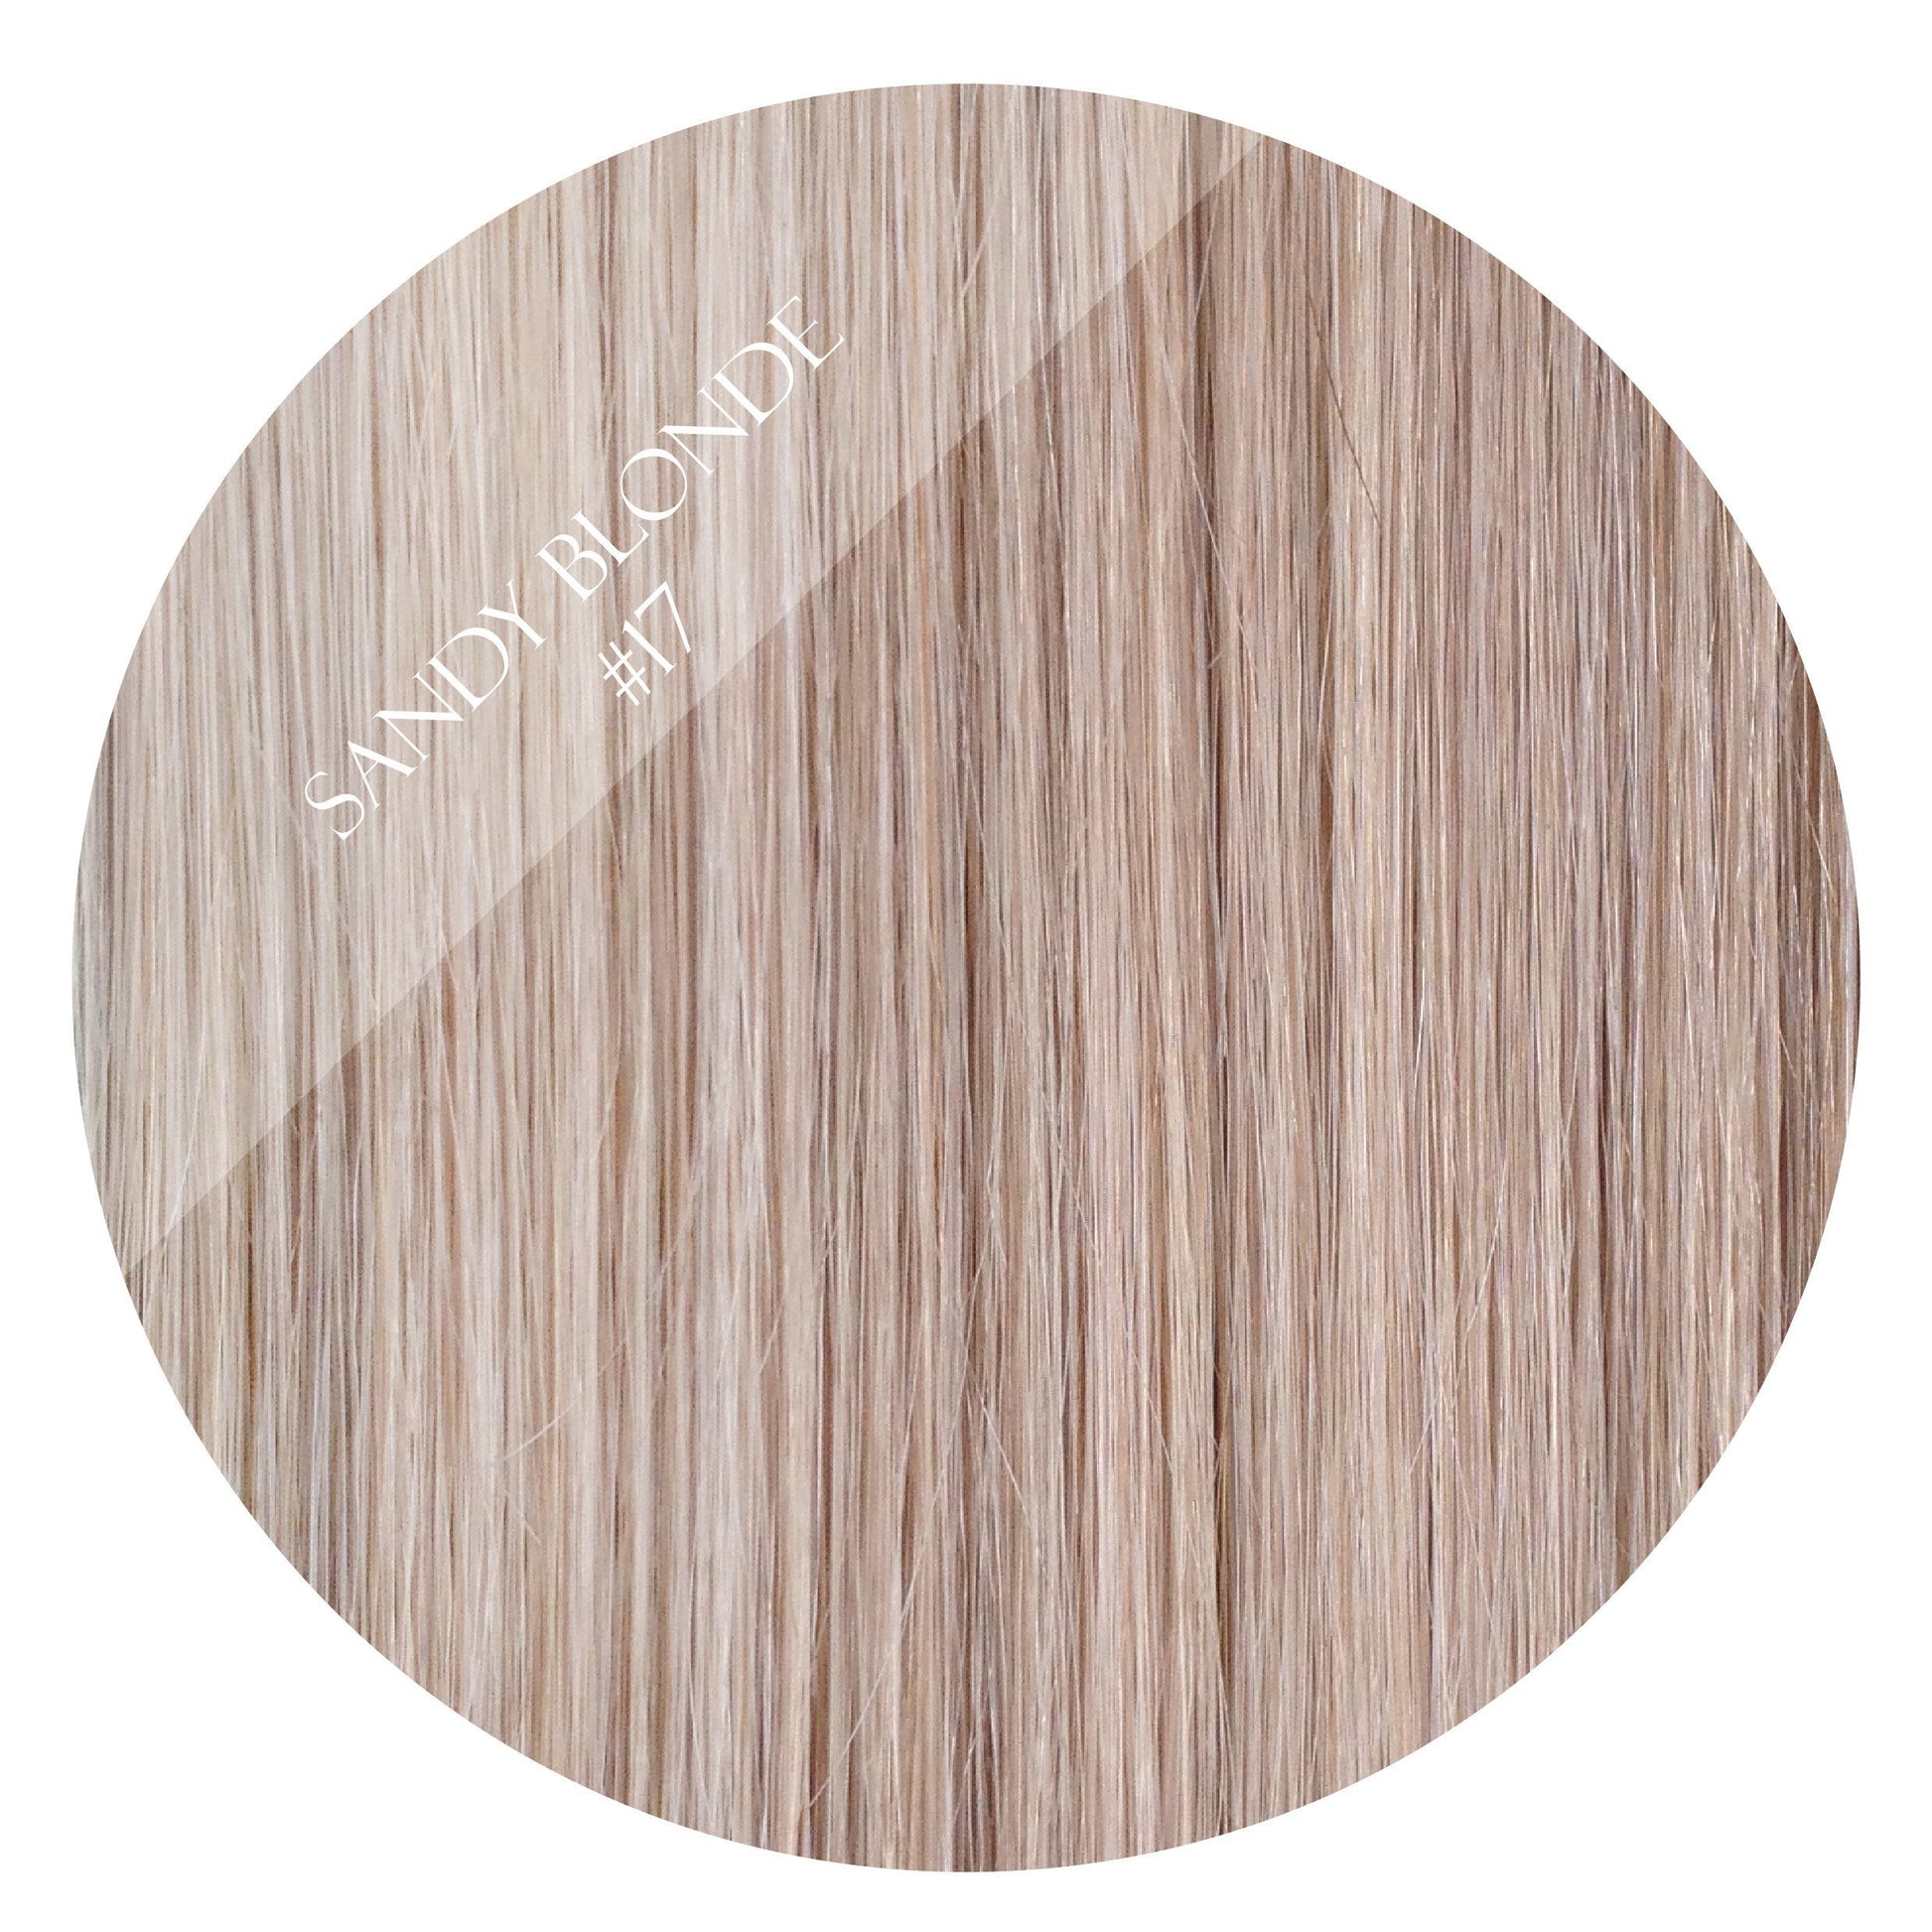 latte blonde #17 clip in hair extensions 22inch deluxe